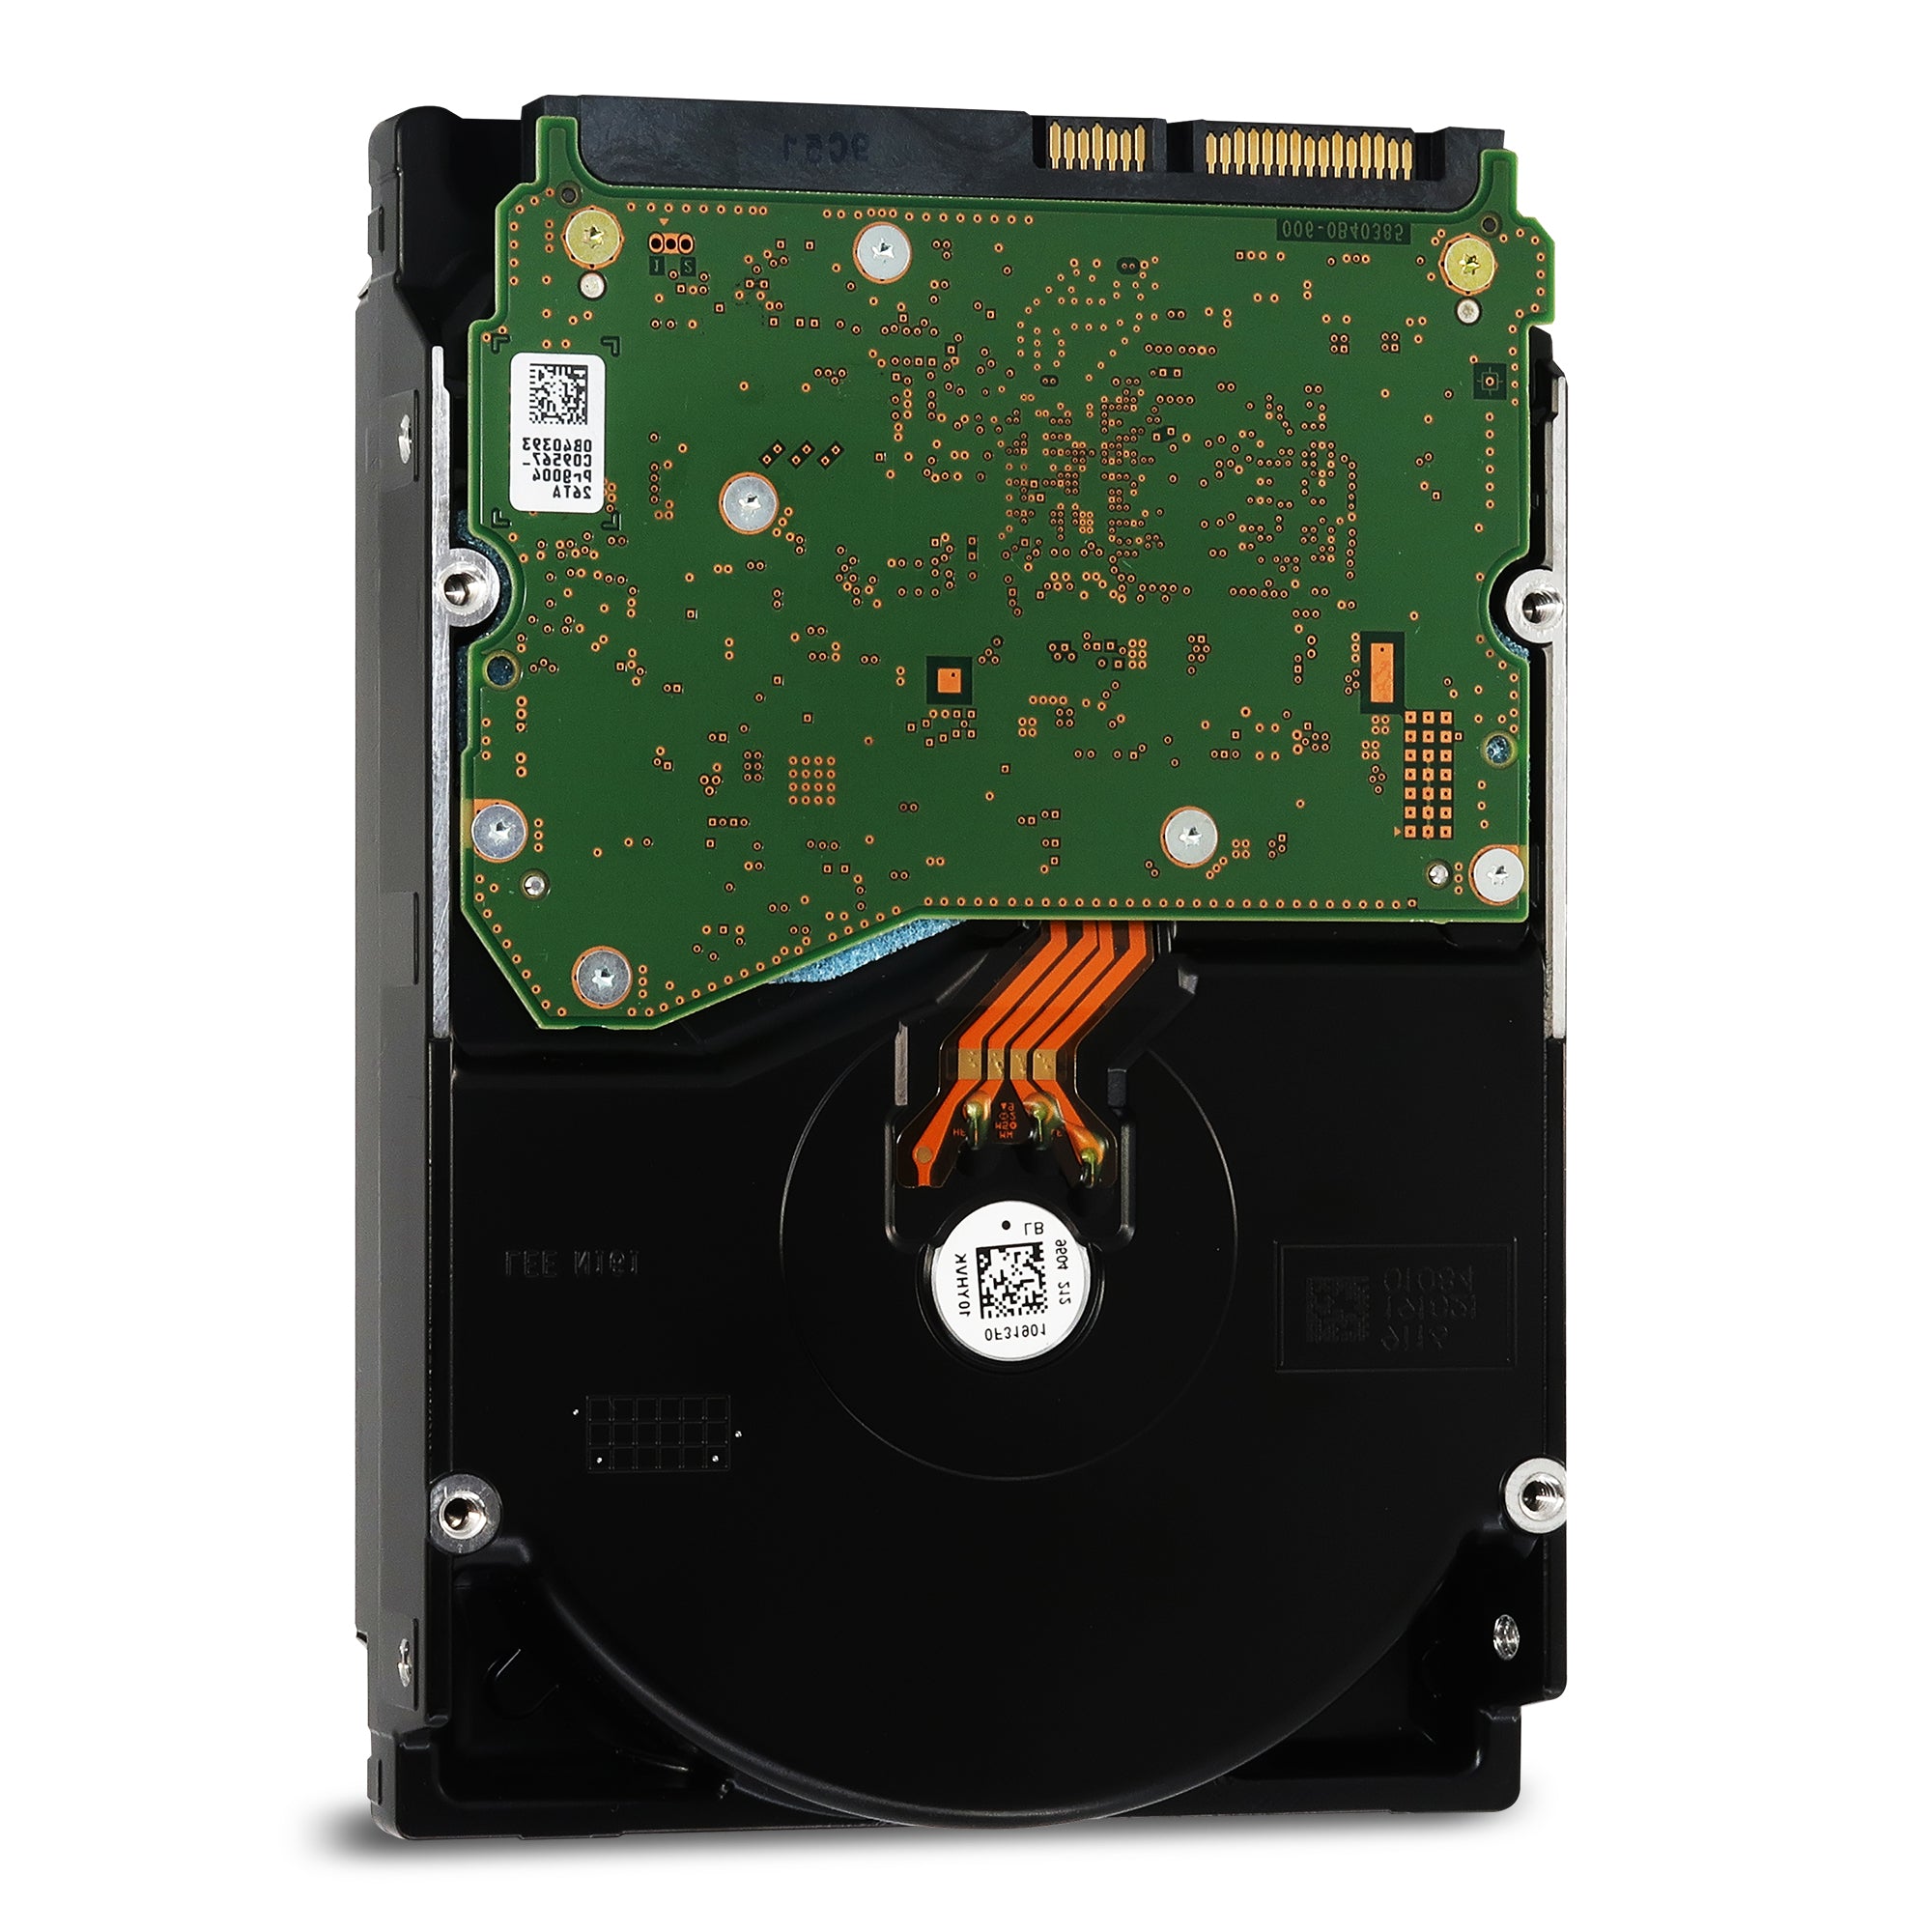 HGST Ultrastar He10 HUH721010ALE601 0F27453 10TB 7.2K RPM SATA 6Gb/s 512e 256MB 3.5" SED Power Disable Pin Manufacturer Recertified HDD - Rear View